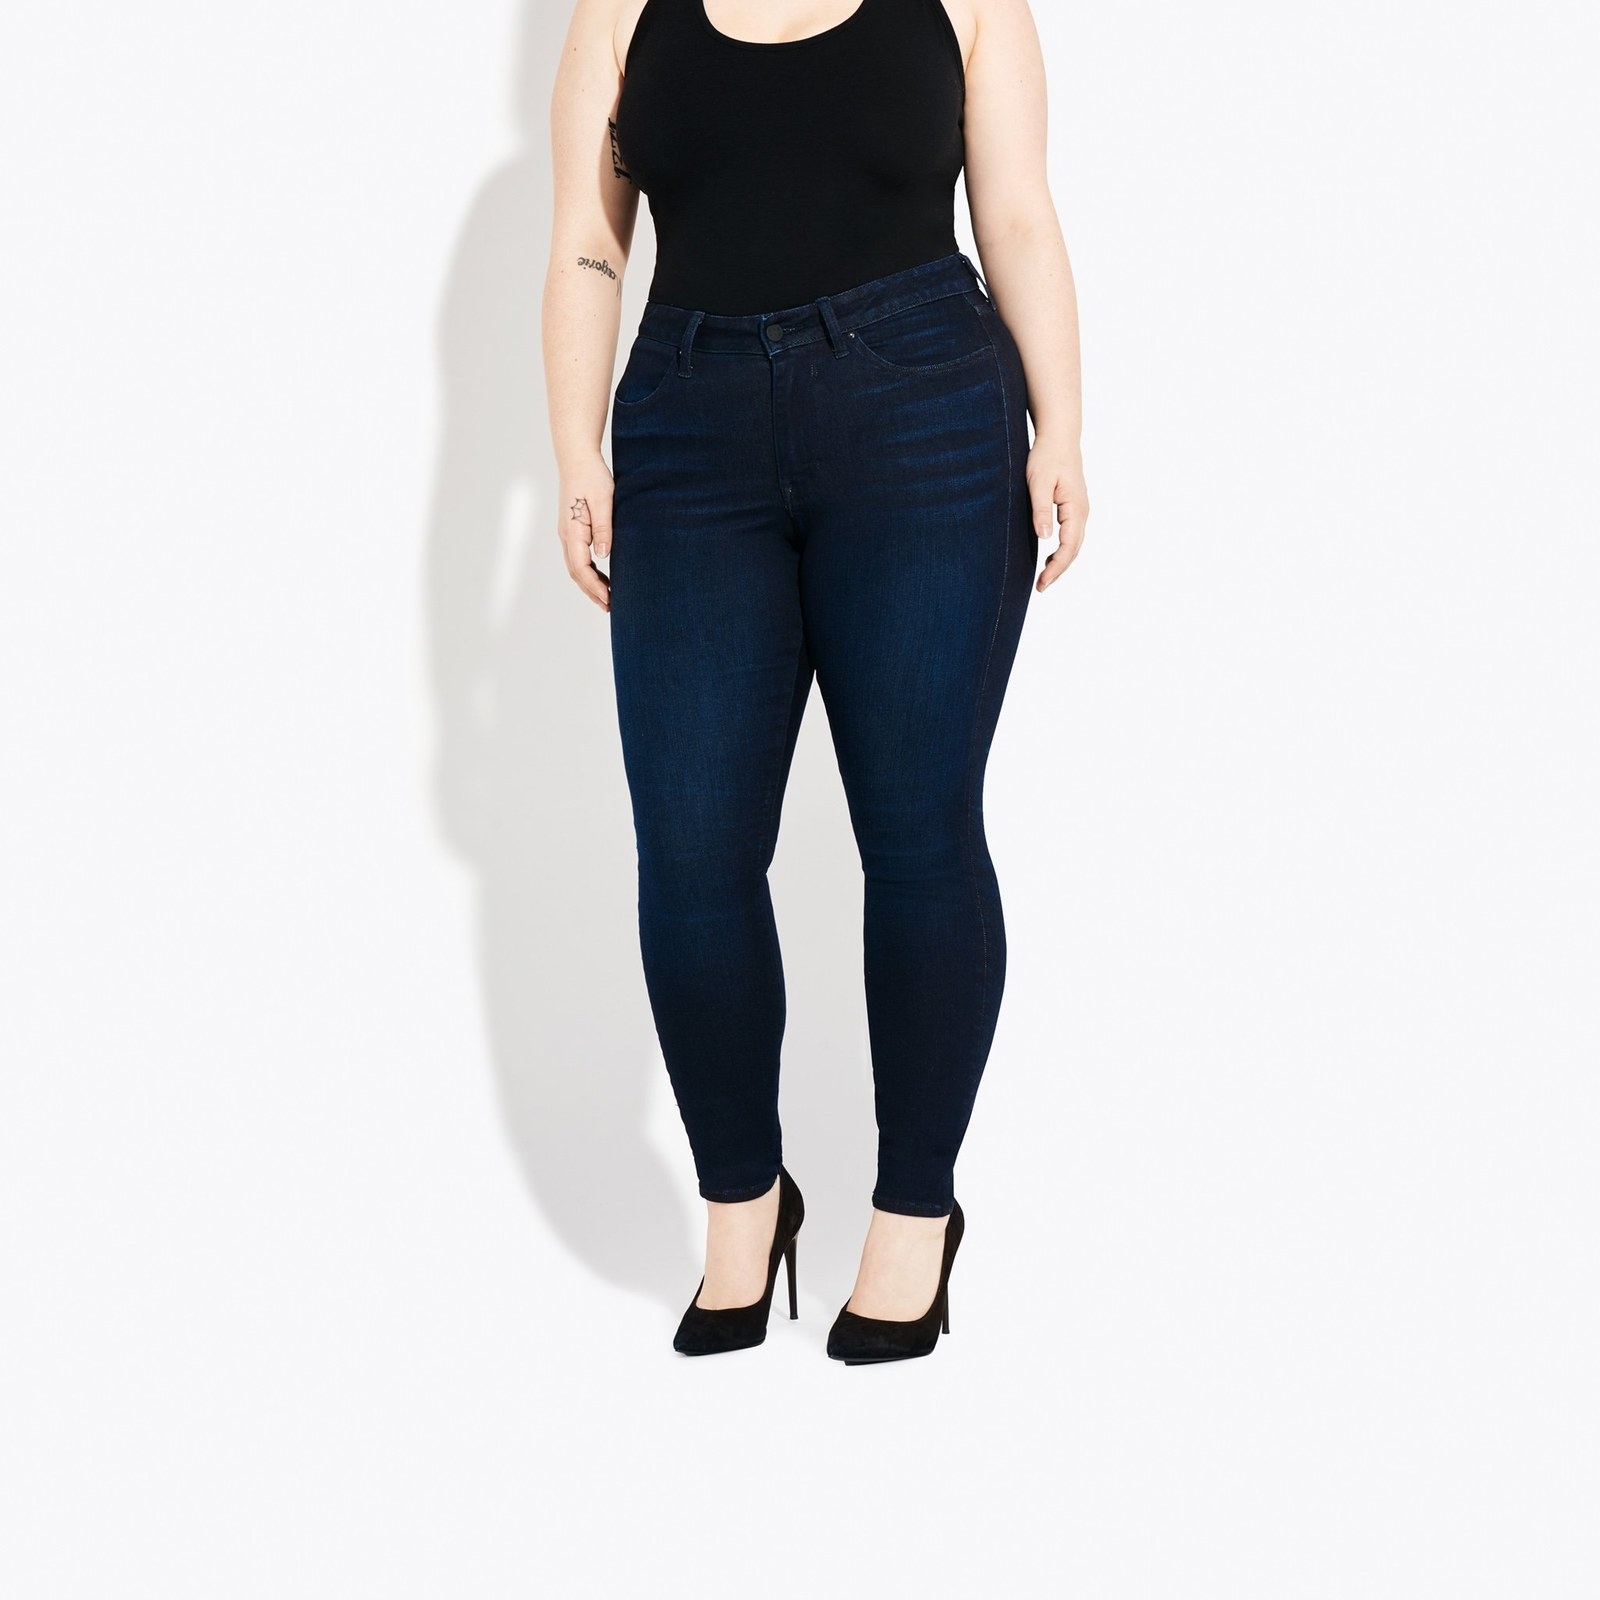 flattering jeans for plus size